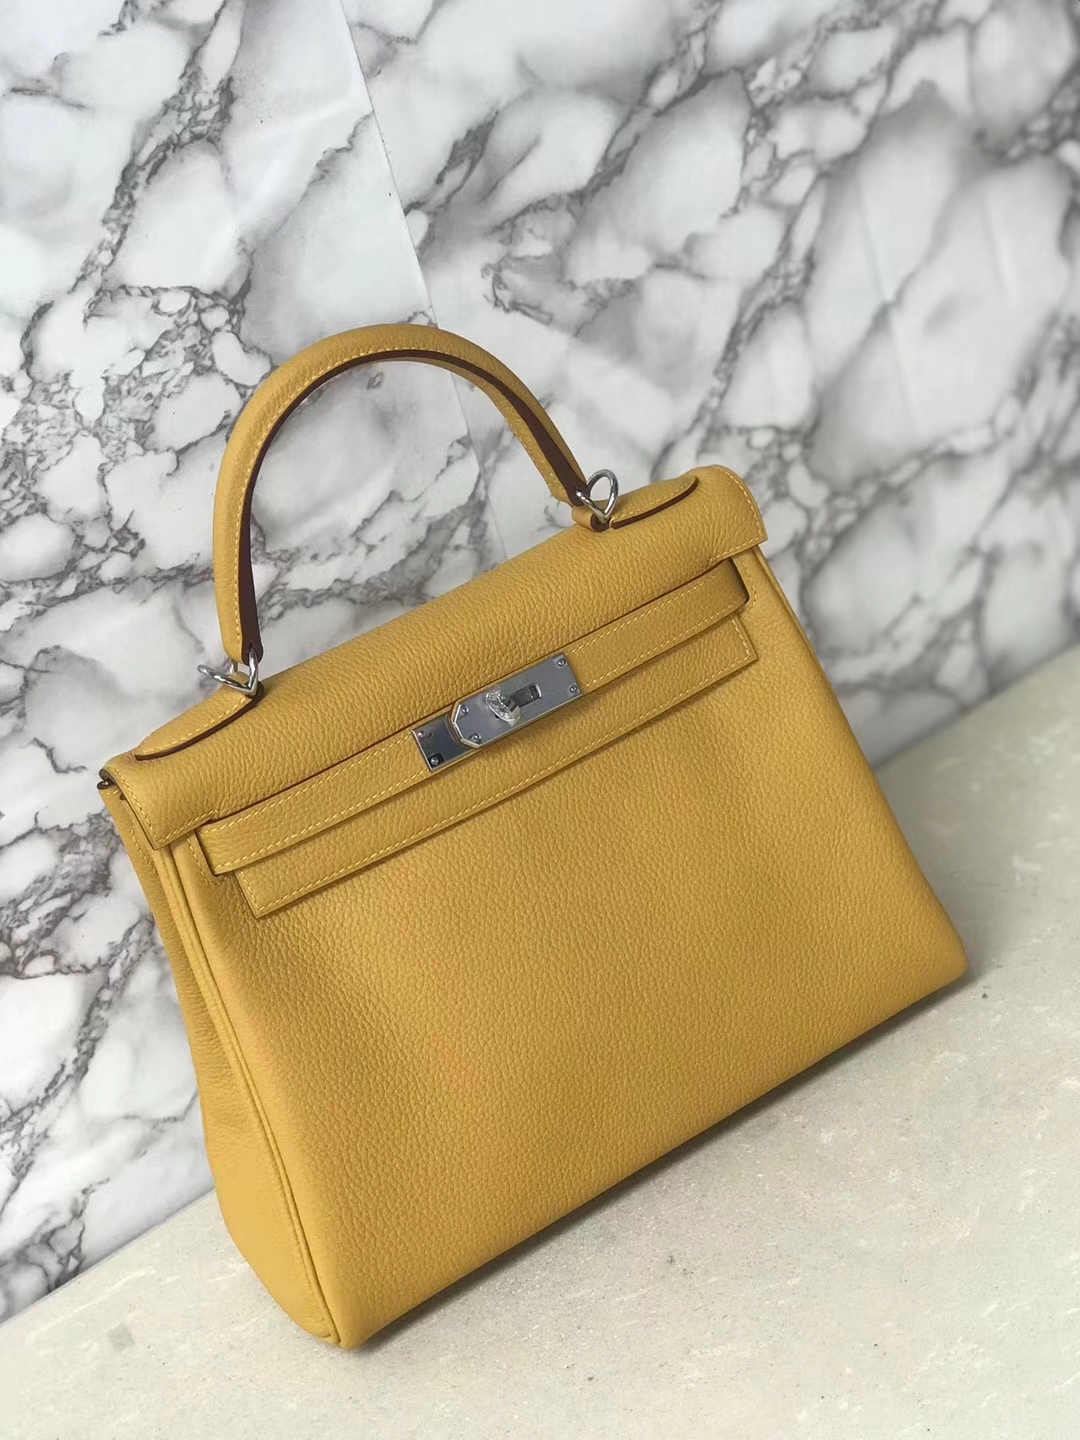 New Hermes 9D Ambre Yellow Togo Calf Kelly28CM Tote Bag Silver Hardware